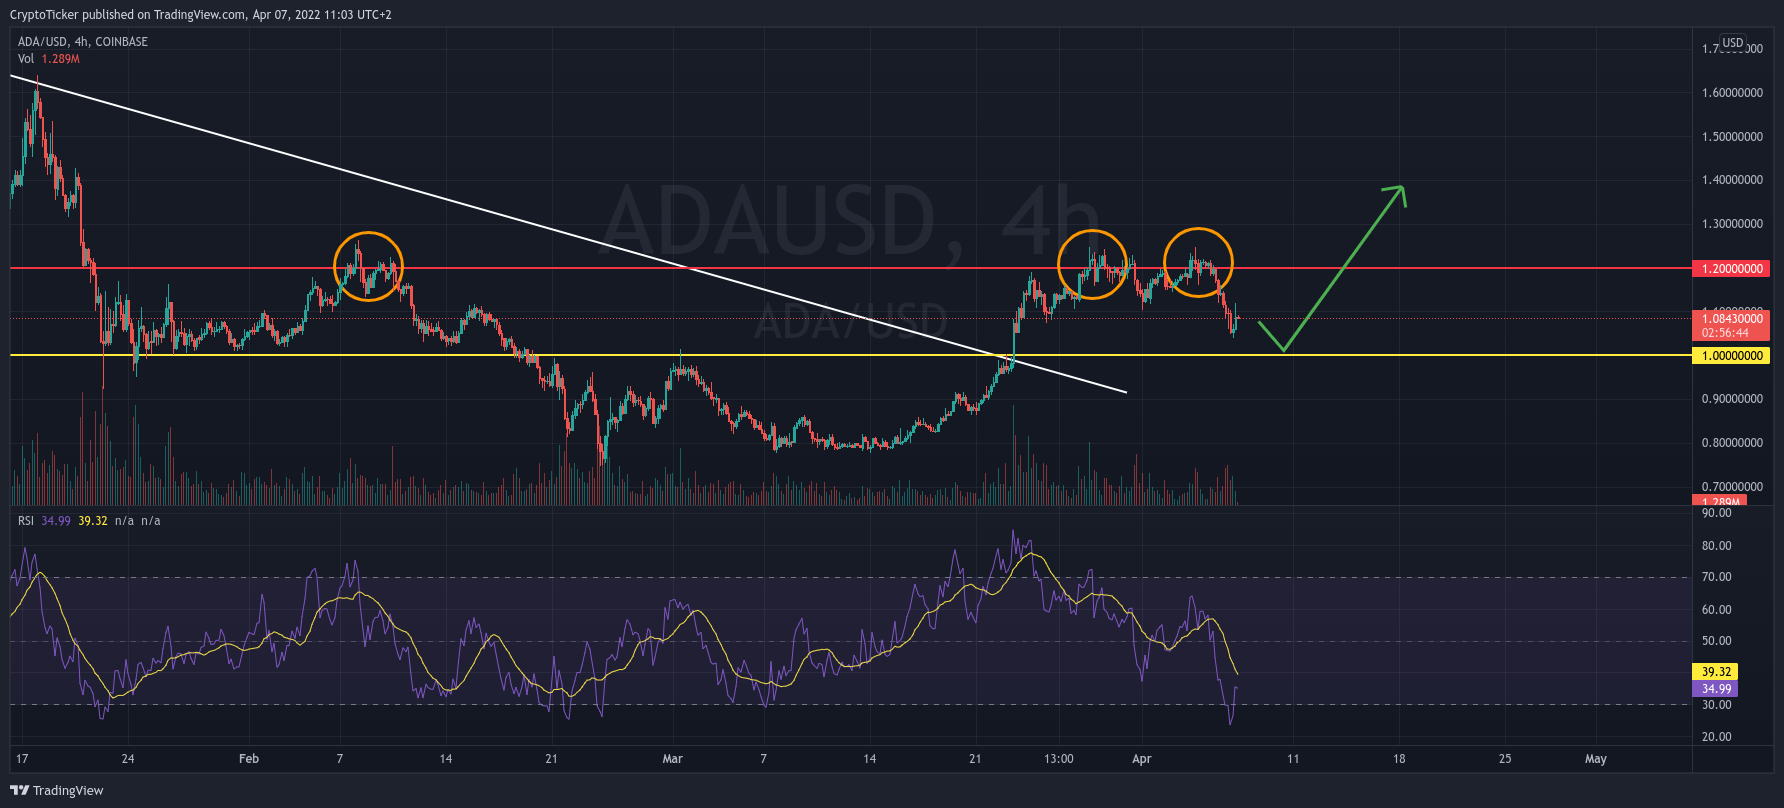 ADA/USD 4-hours chart showing the resistance price of Cardano